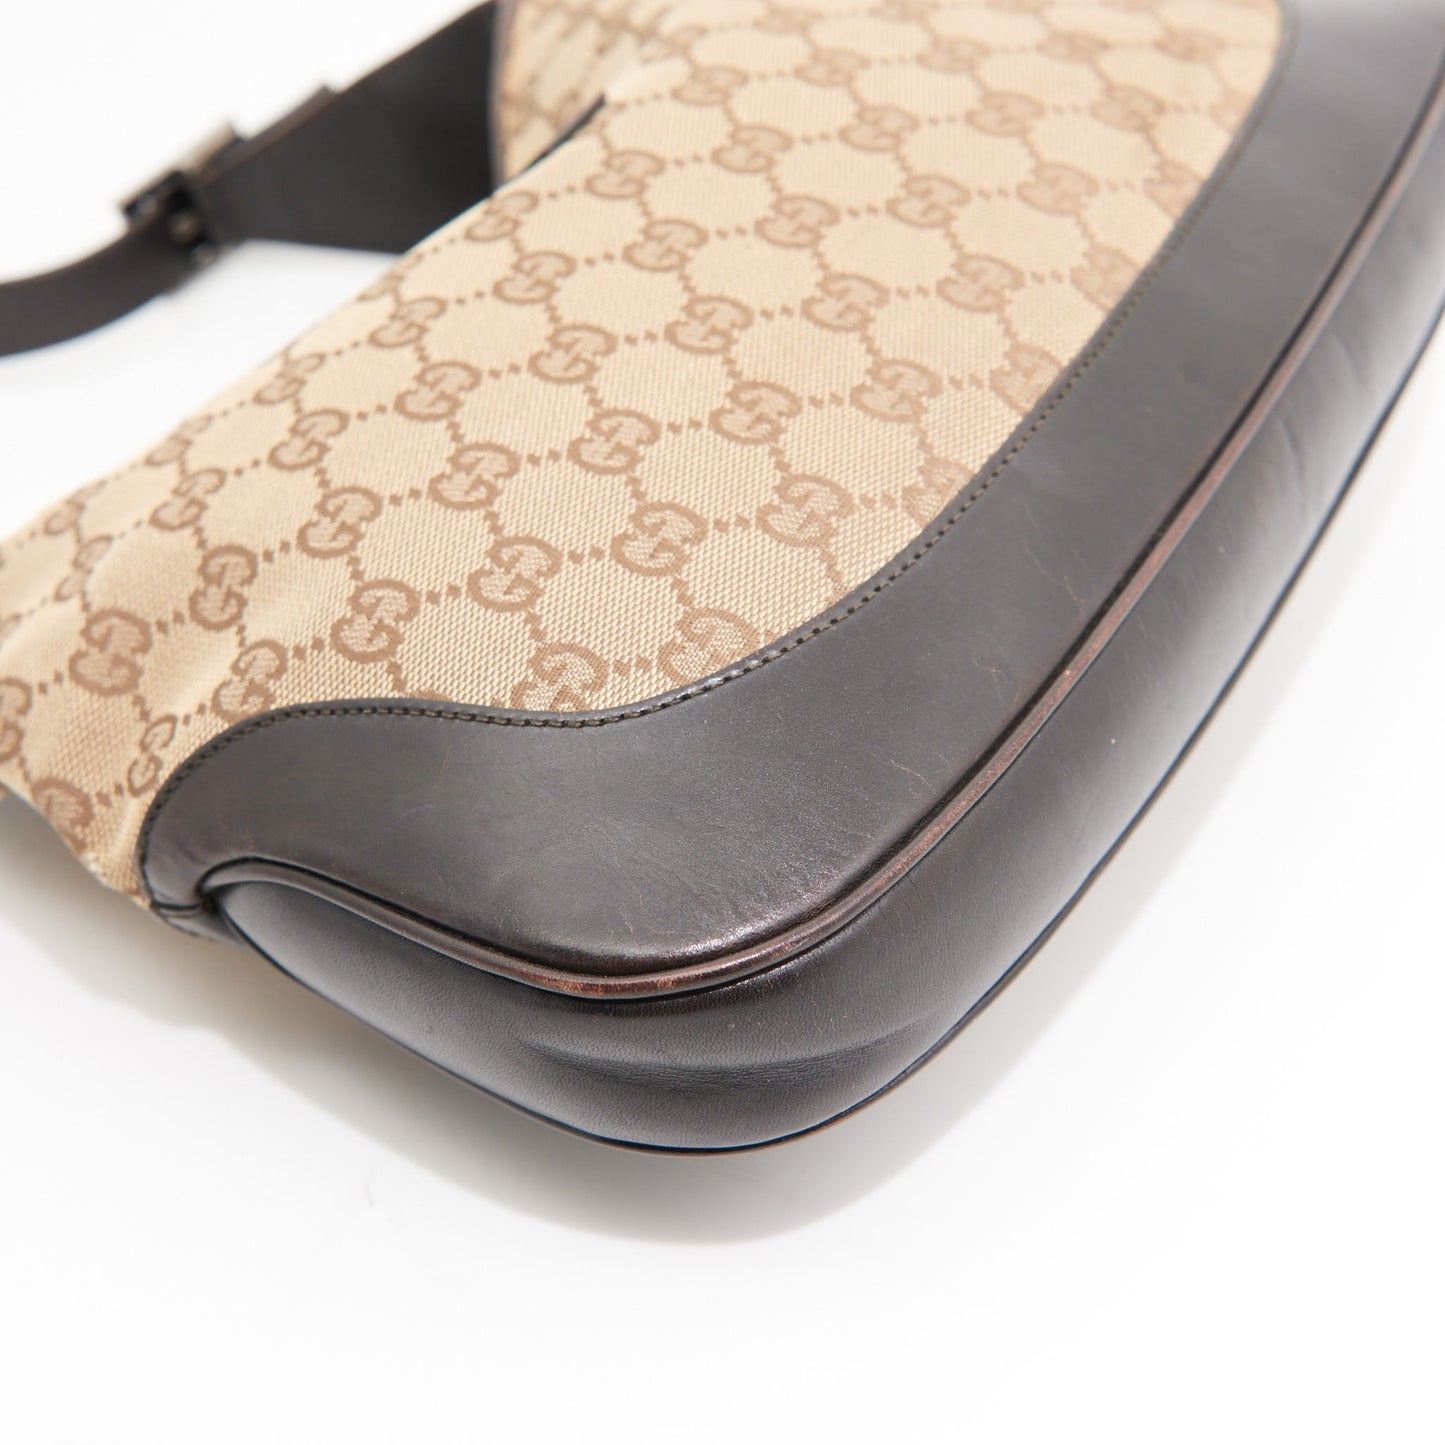 Gucci Canvas Jackie-O in Brown Gucci Monogram SHW